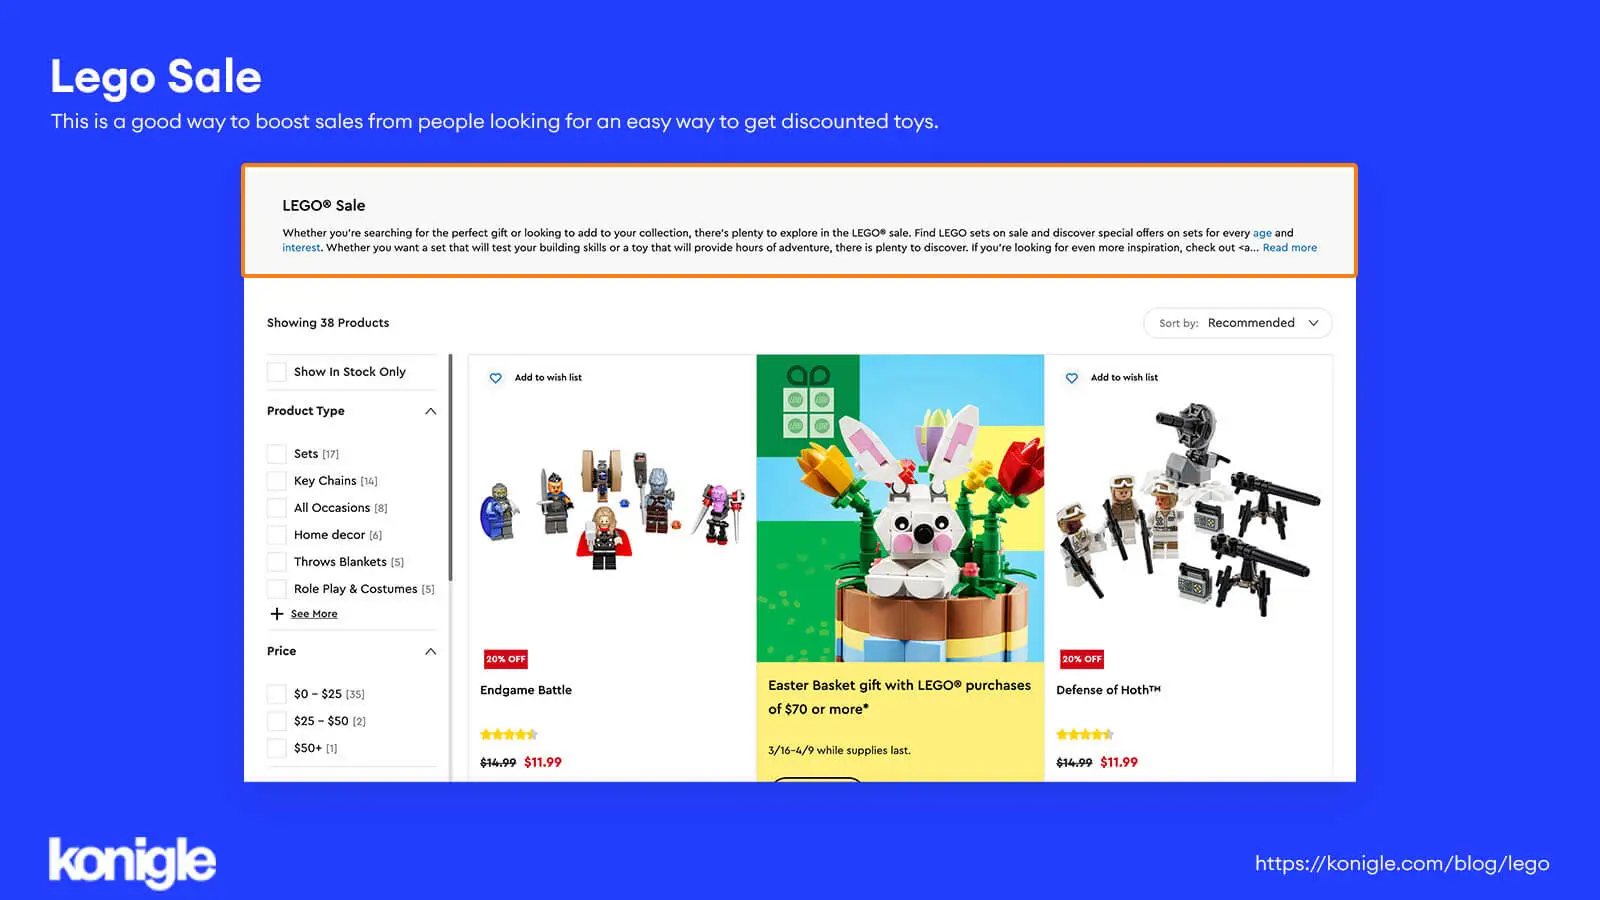 Sales collection on LEGO's website